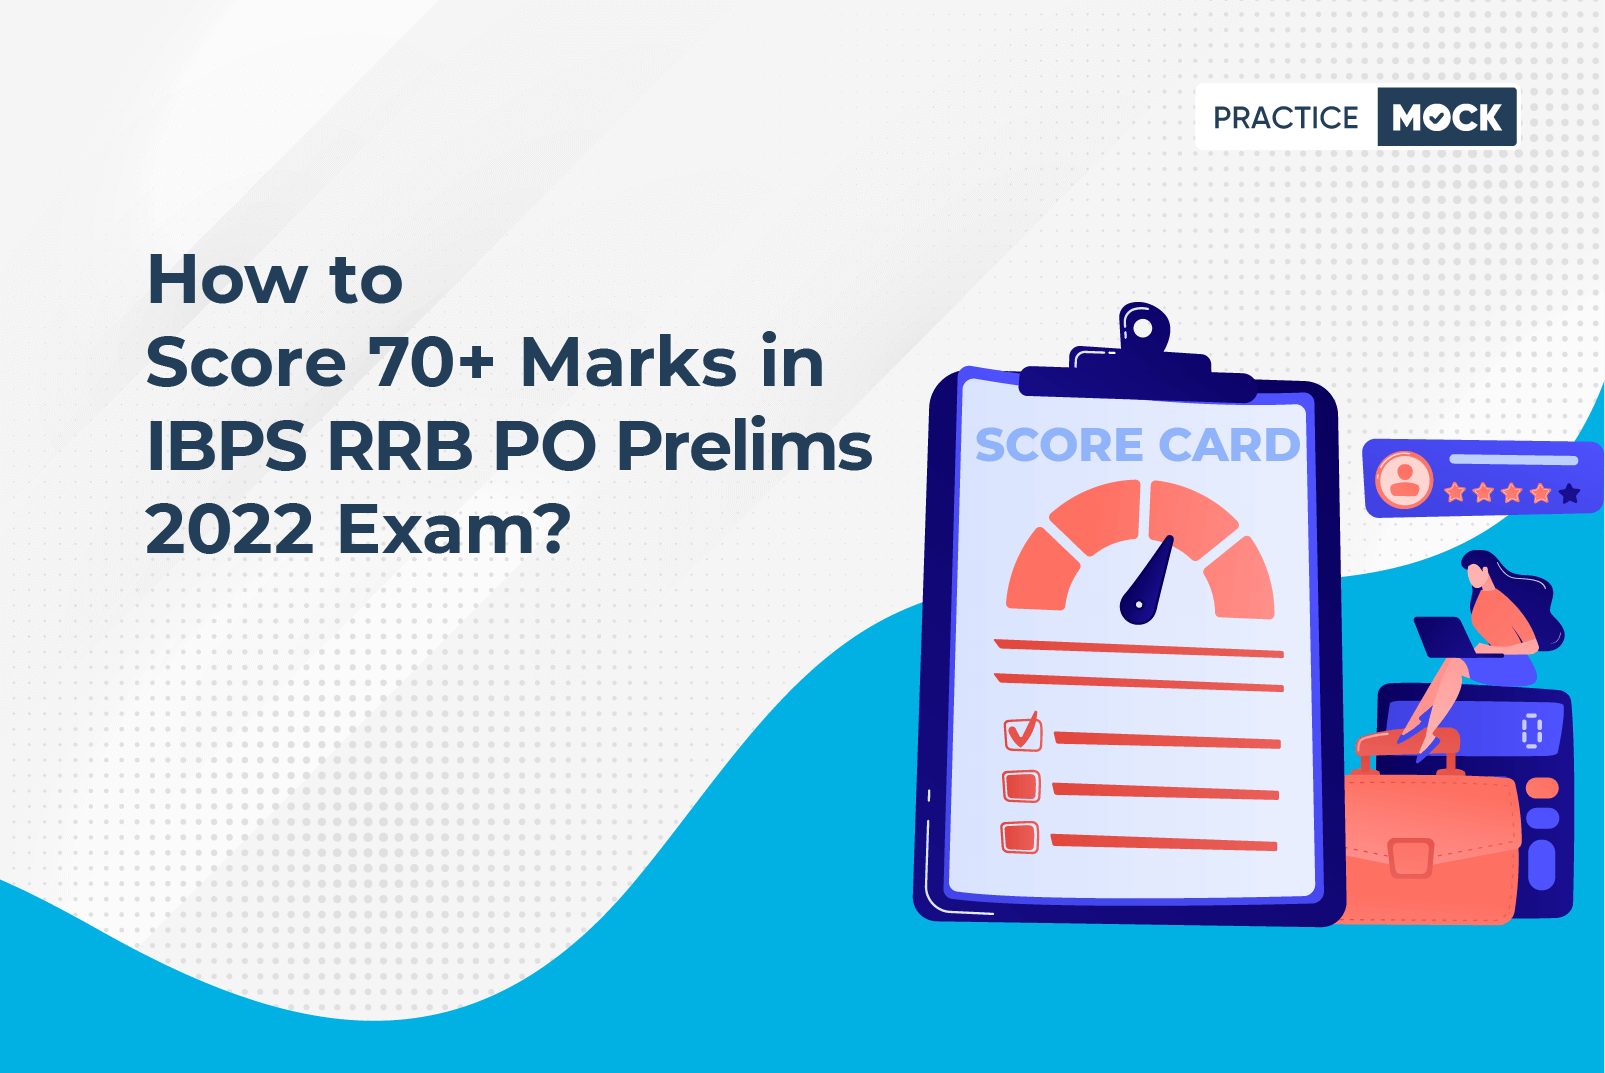 How to Score 70+ Marks in IBPS RRB PO Prelims 2022 Exam?